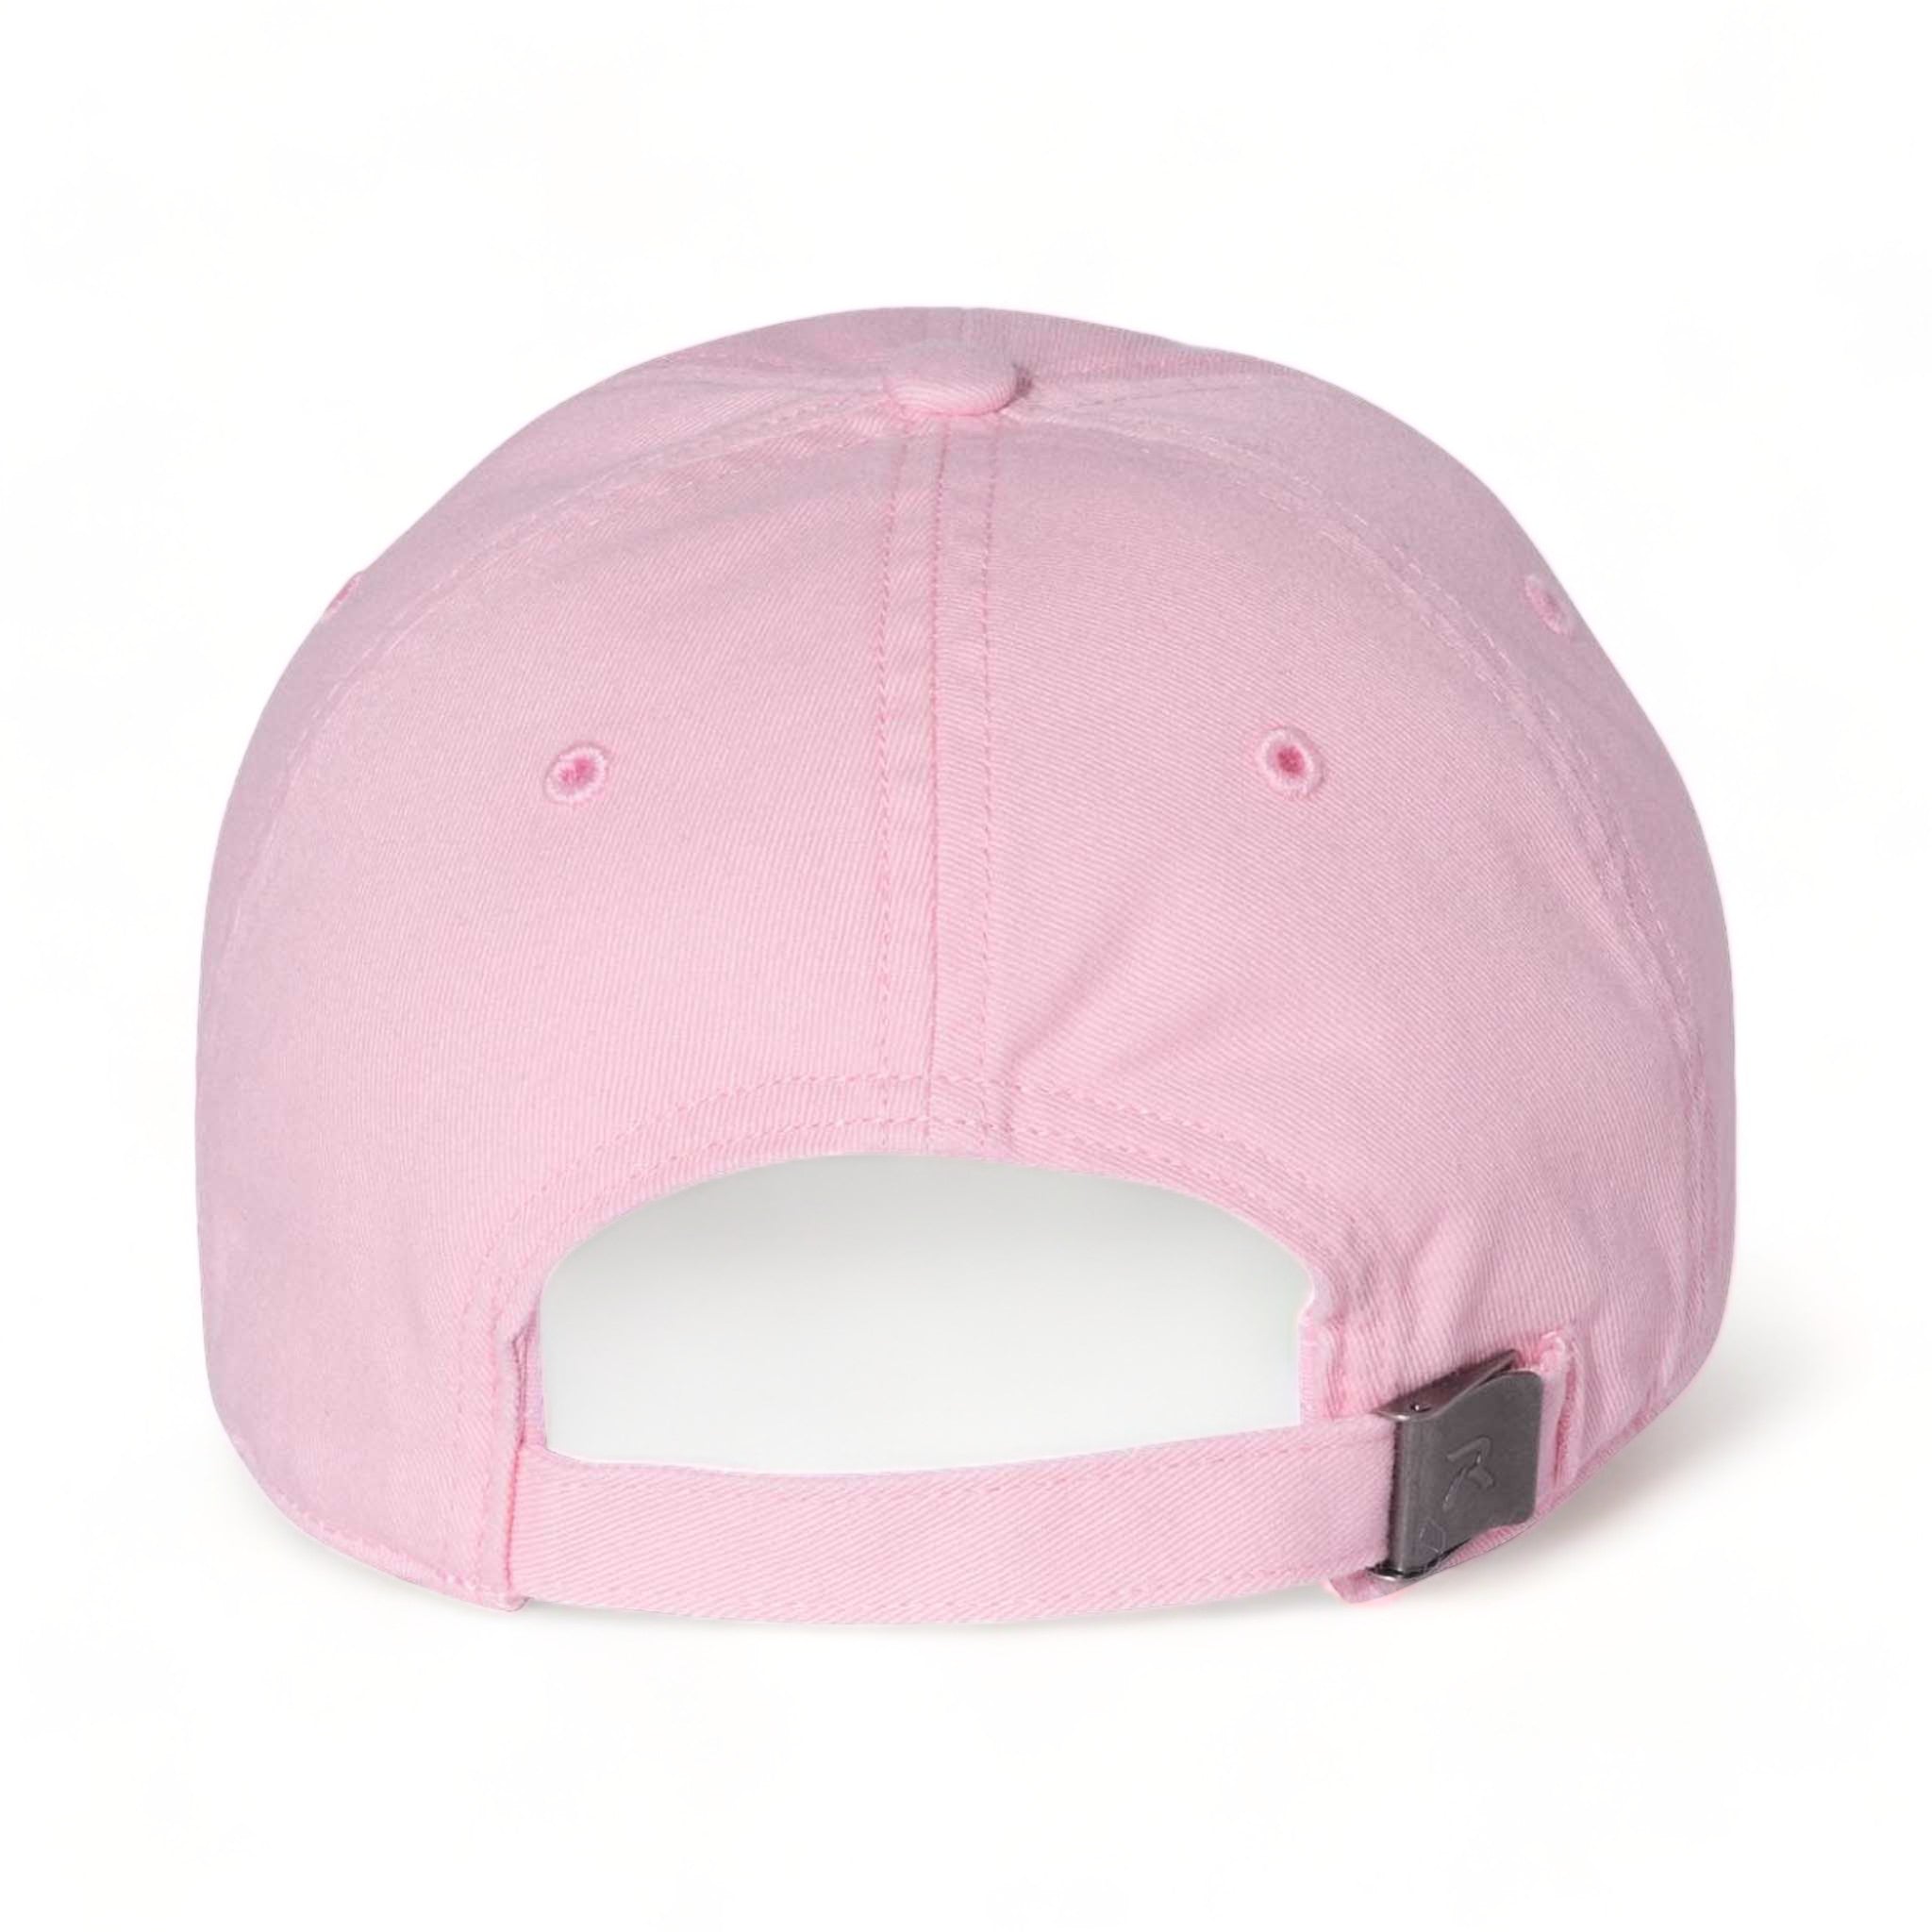 Back view of Richardson 320 custom hat in pink